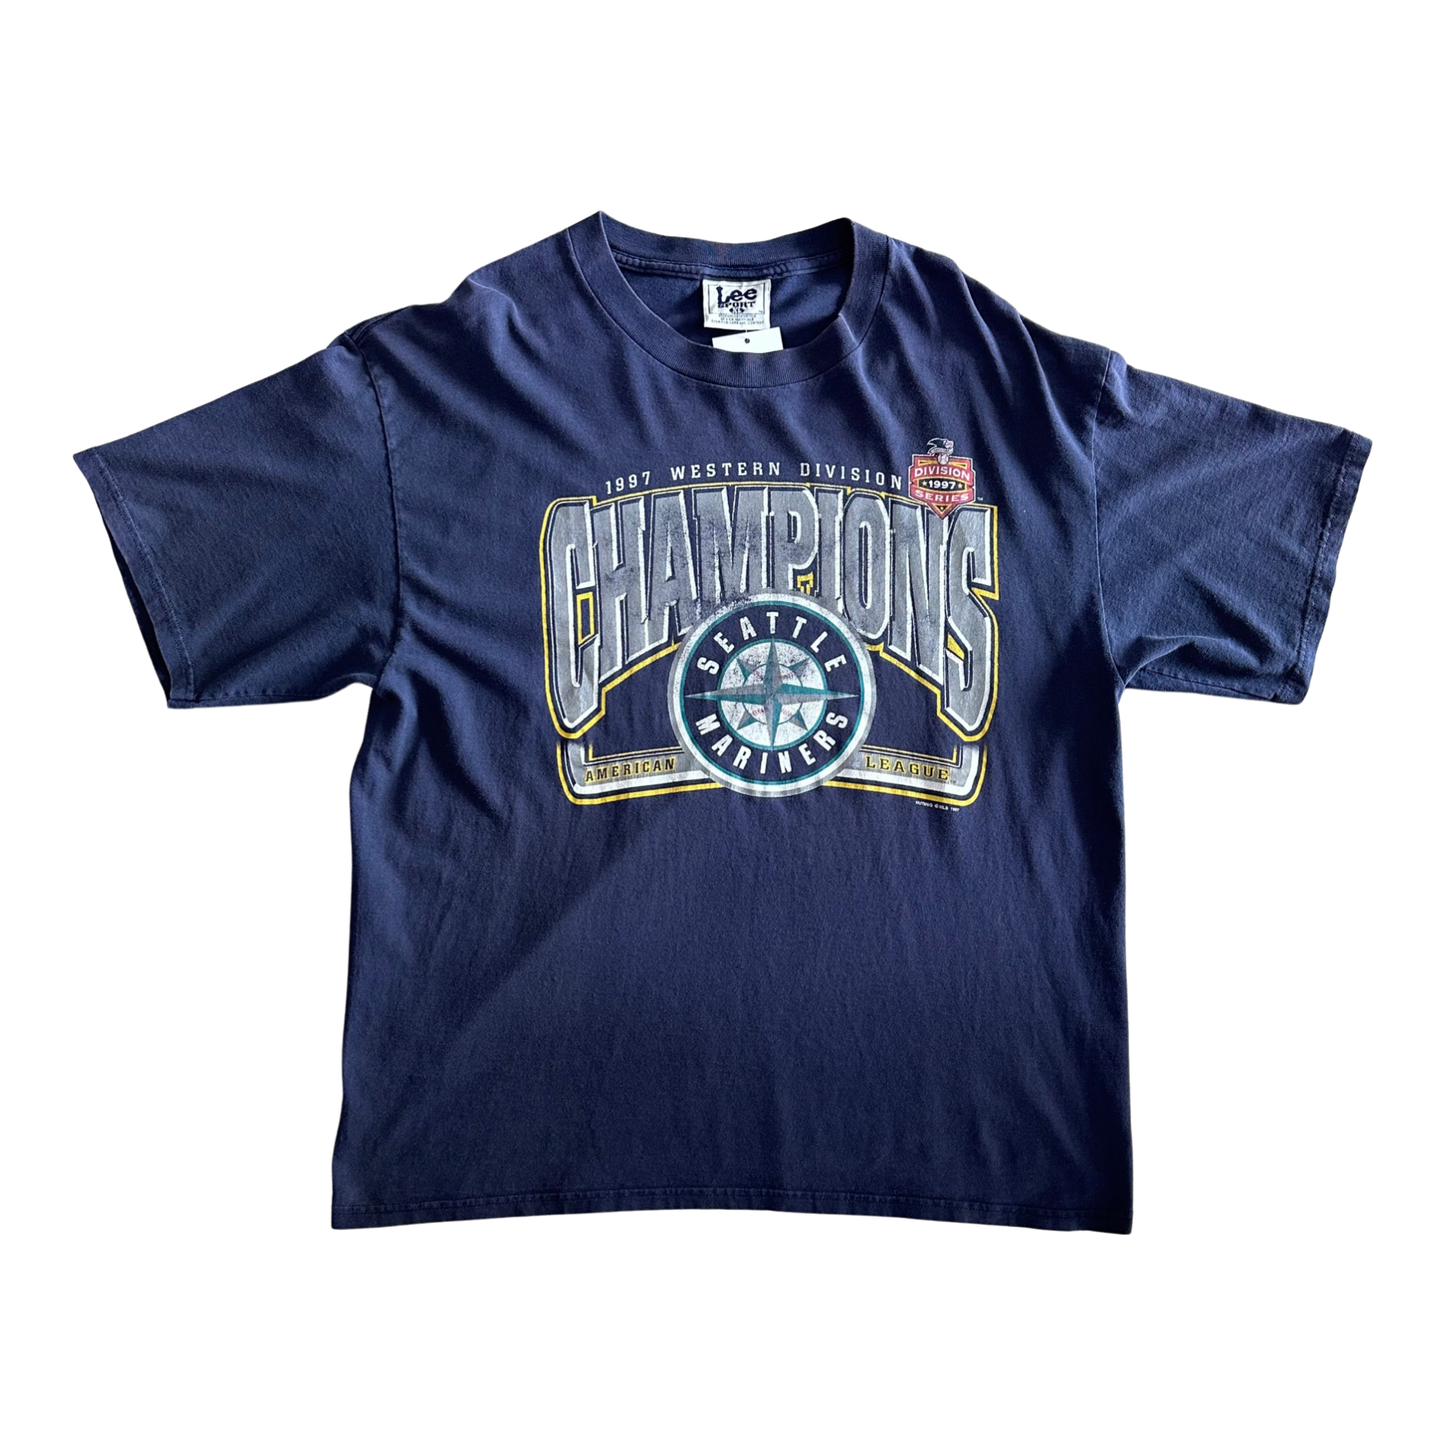 Vintage 1997 Seattle Mariners Champs Tee XL